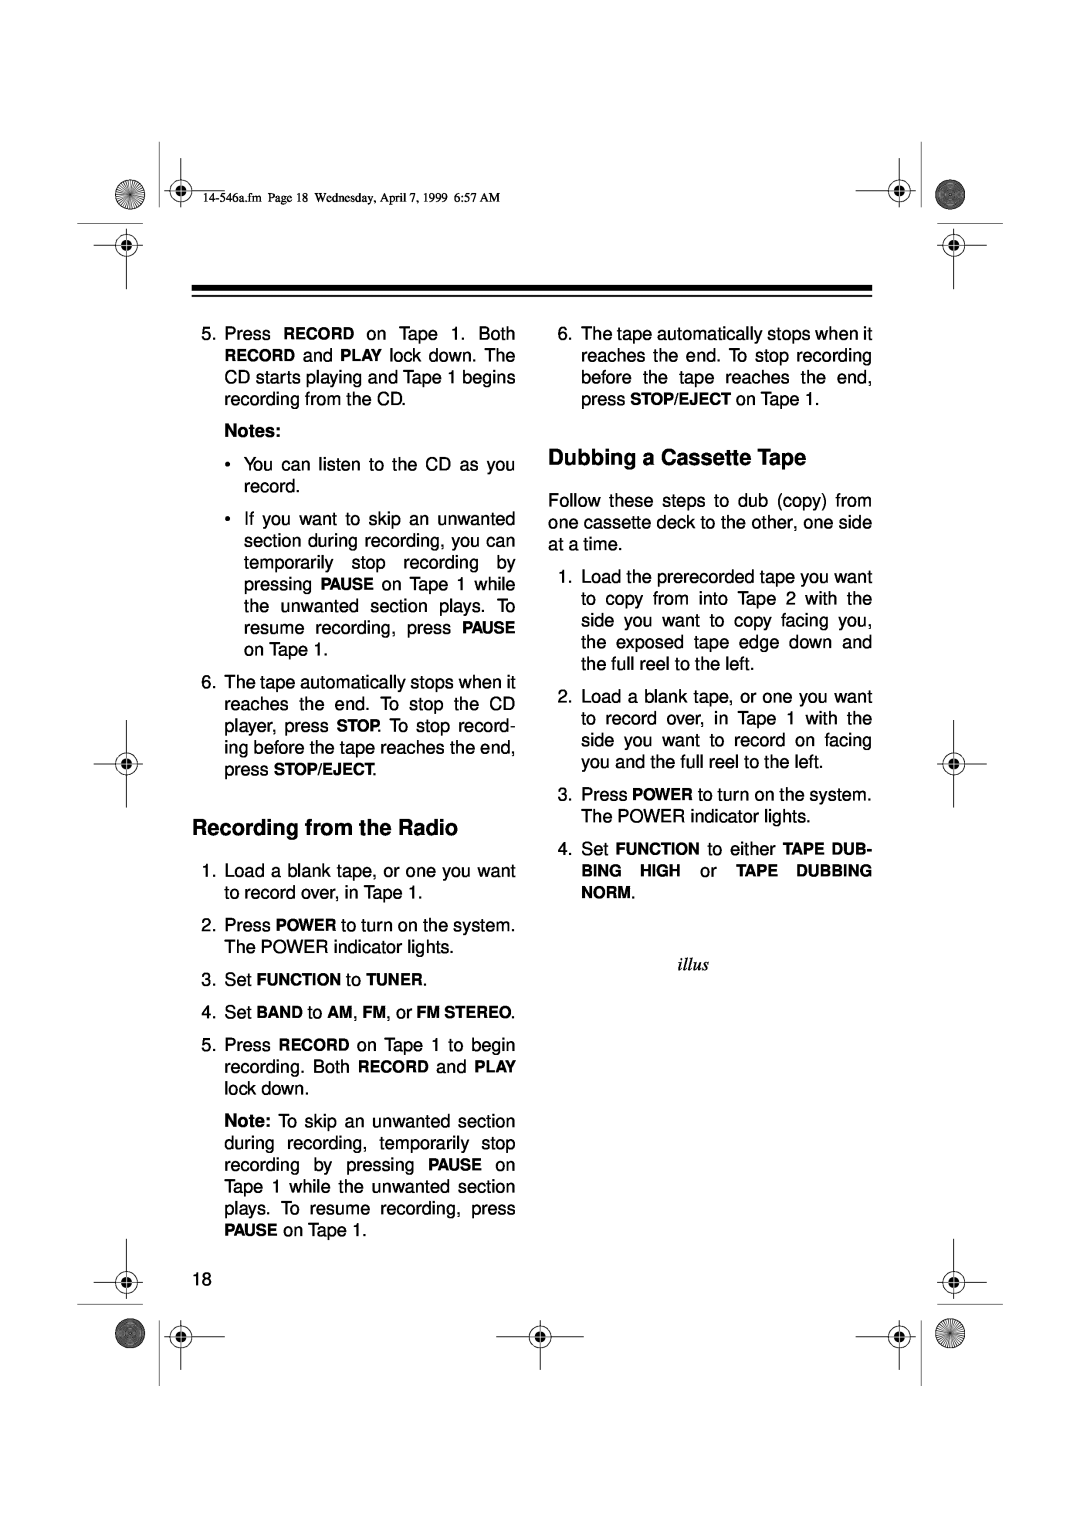 Optimus 14-546A, CD-3321 owner manual Recording from the Radio, Dubbing a Cassette Tape, illus 